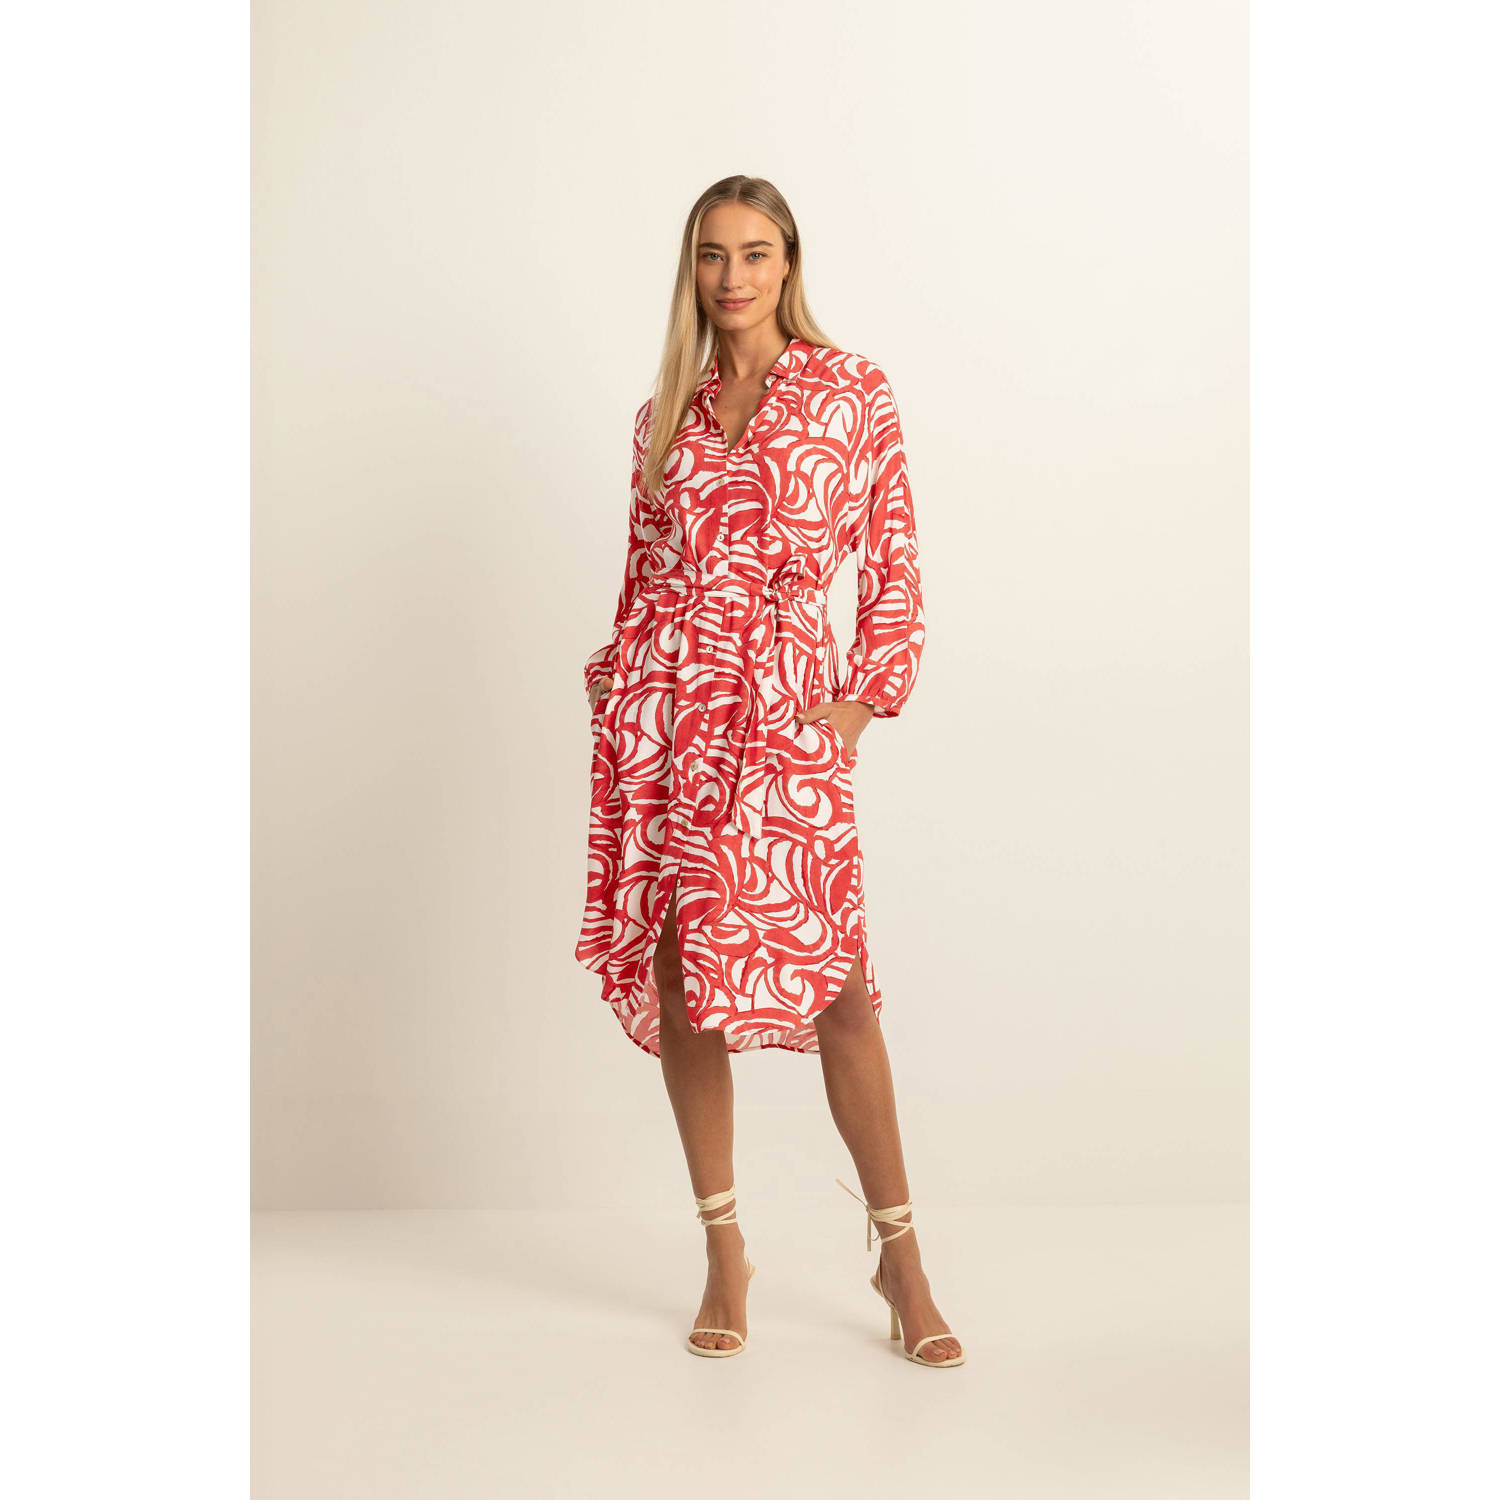 Expresso blousejurk met all over print rood wit